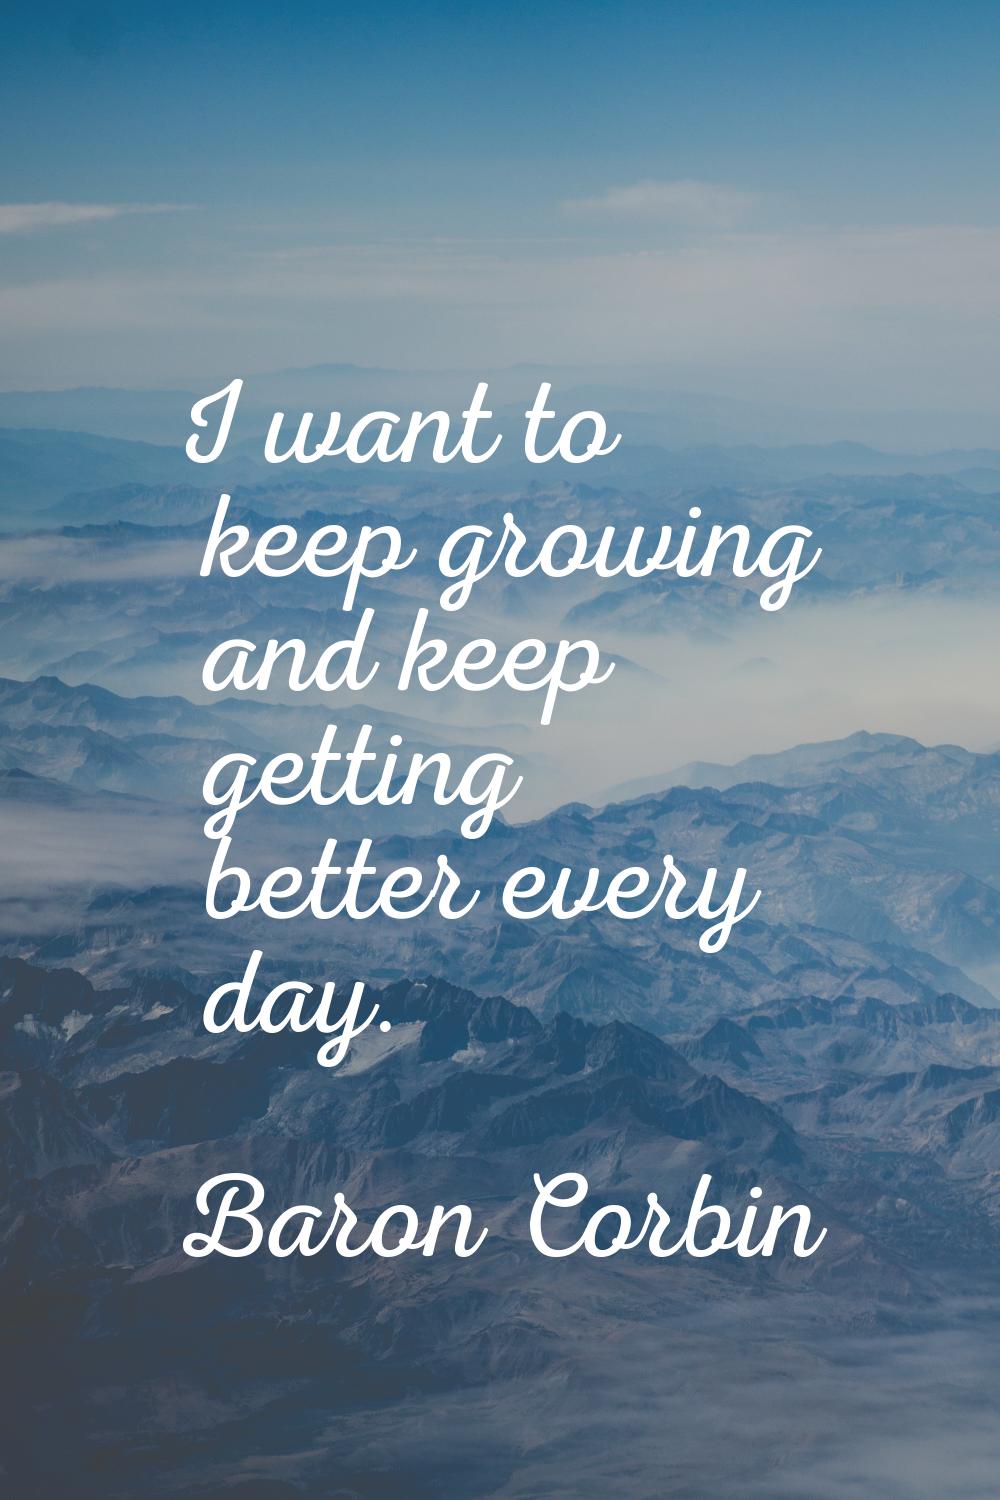 I want to keep growing and keep getting better every day.